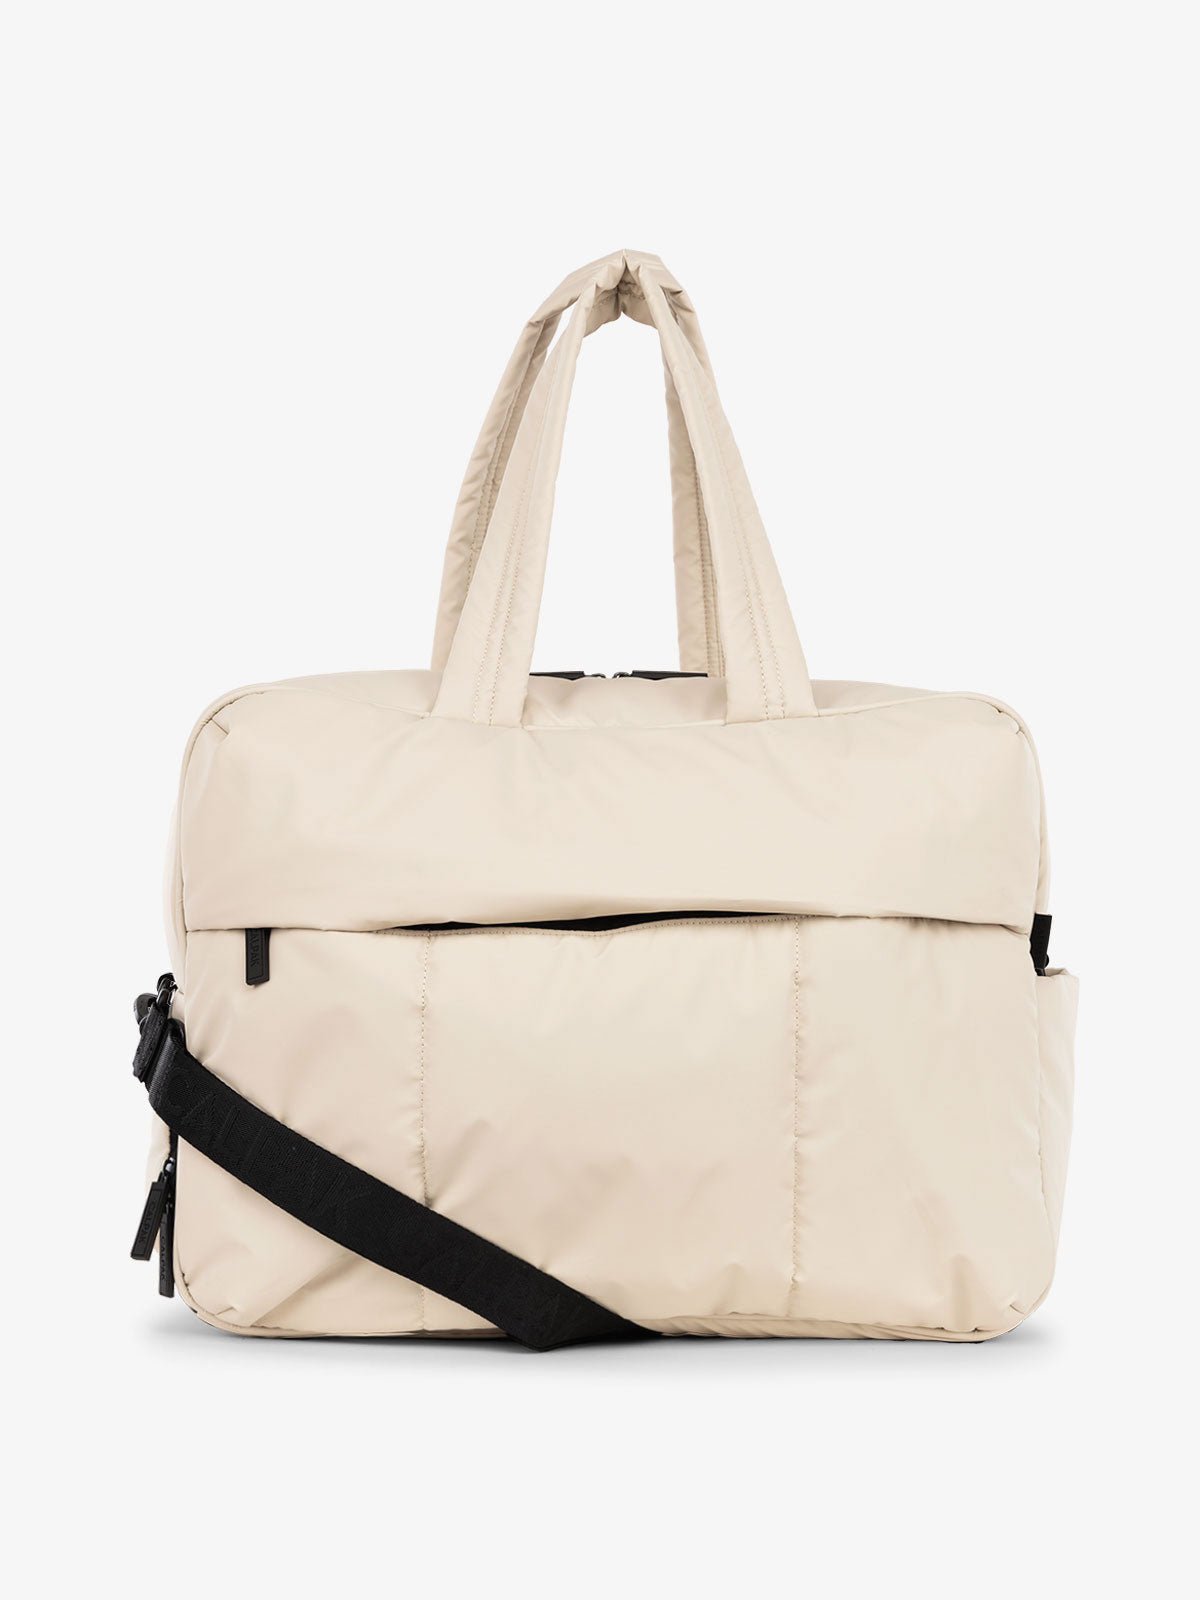 CALPAK Luka large duffle bag with detachable strap and zippered front pocket in oatmeal